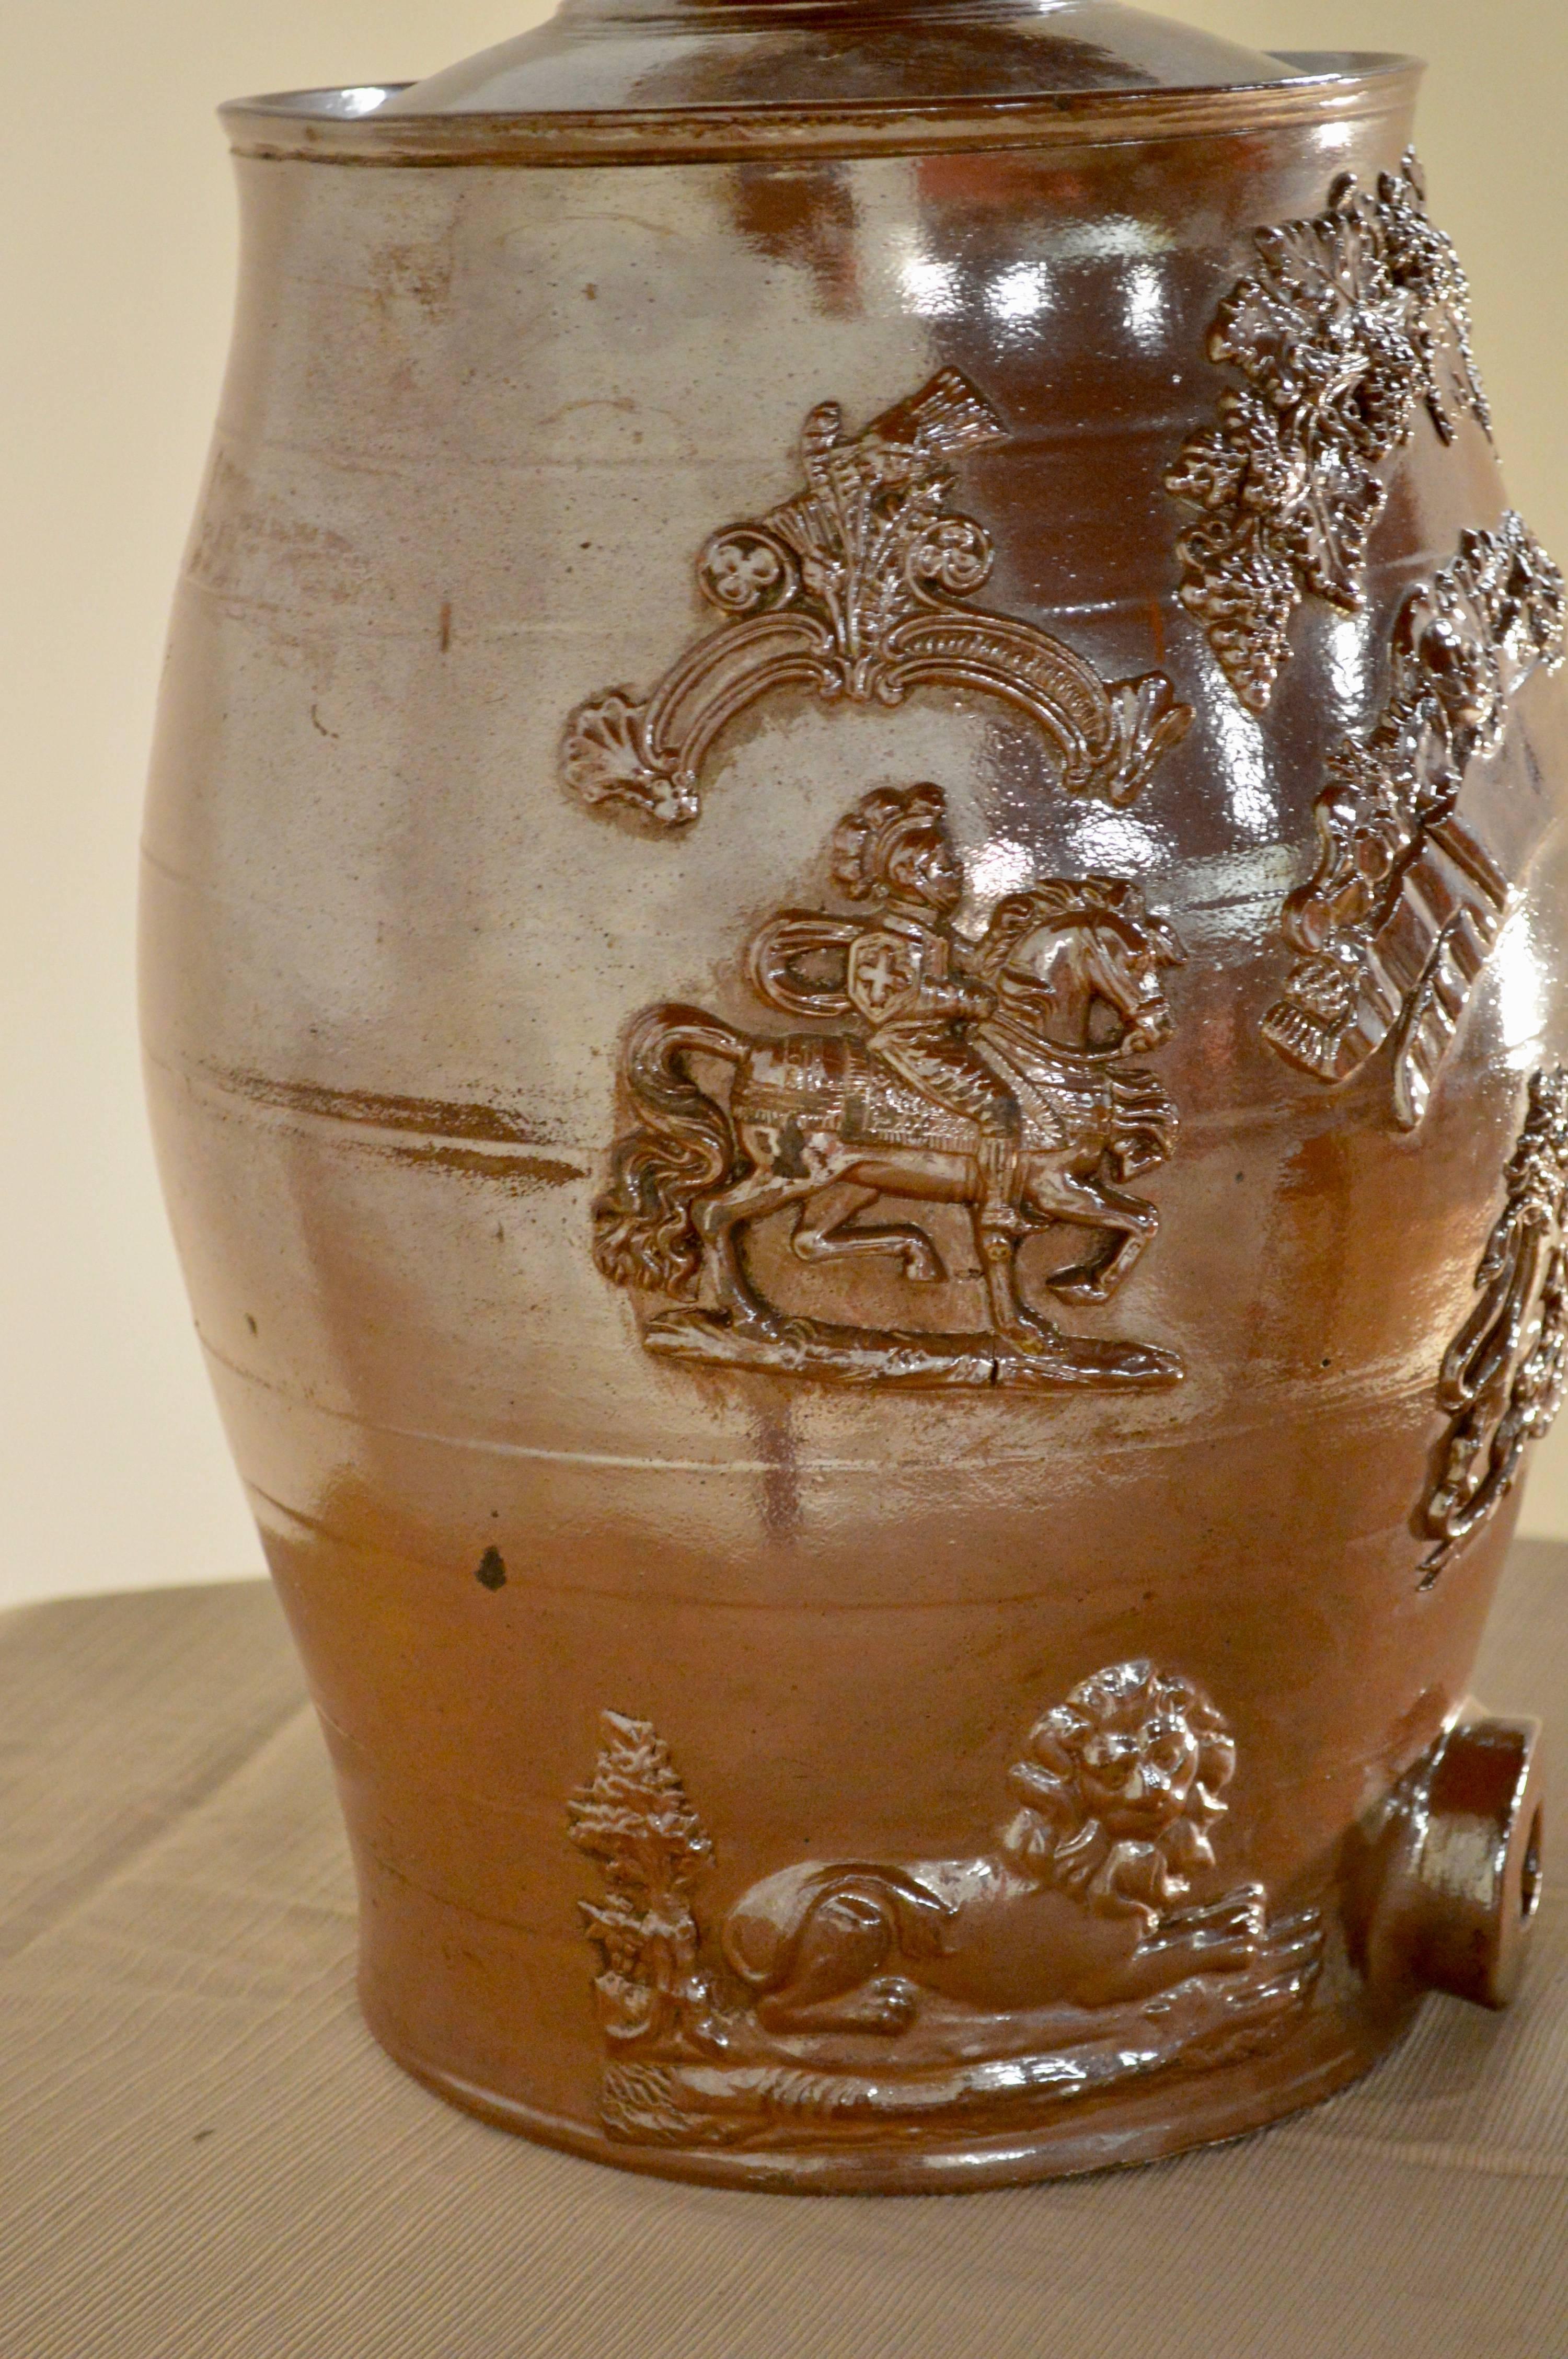 19th century English spirit barrel made of stoneware with alkaline glaze. Features relief designs on both sides of lions and knights on horses.
     